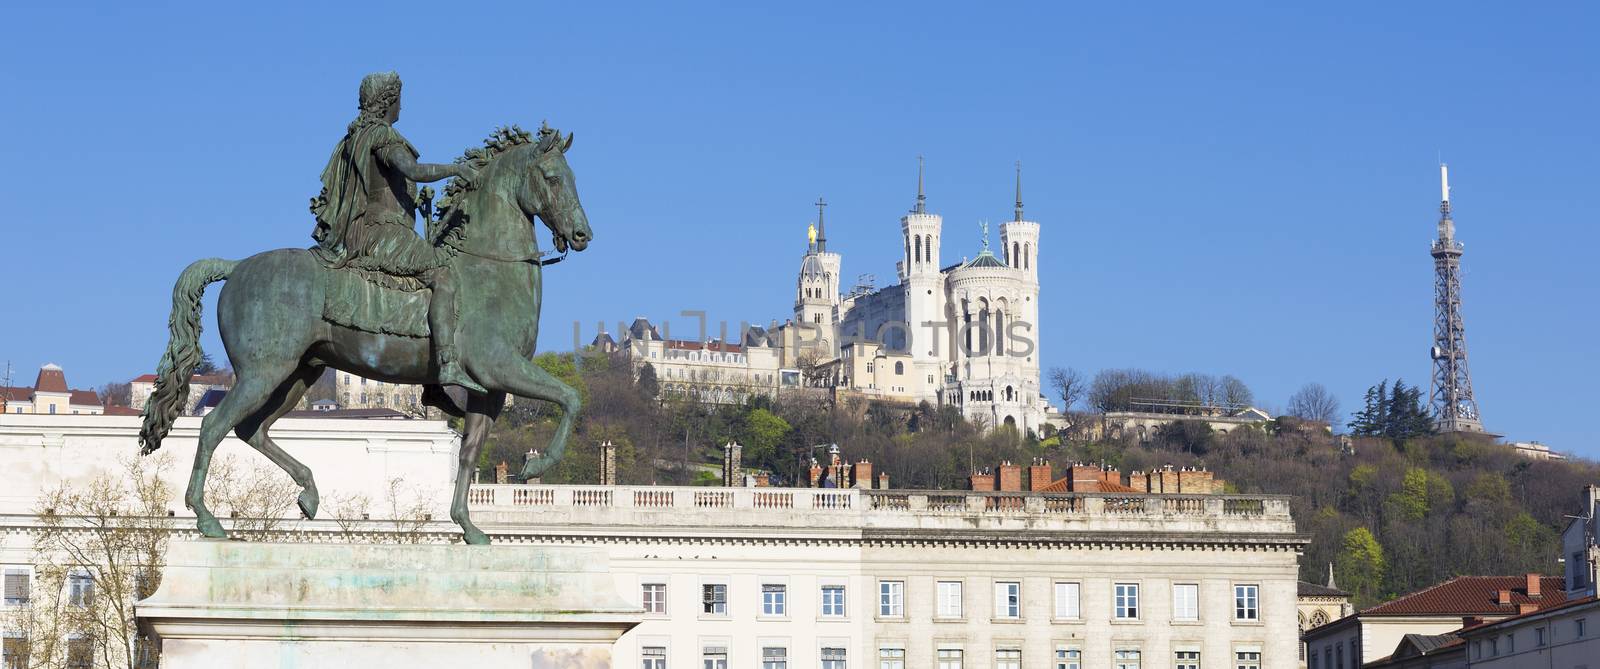 Panoramic view of Statue  and Basilica on a background, Lyon, France.